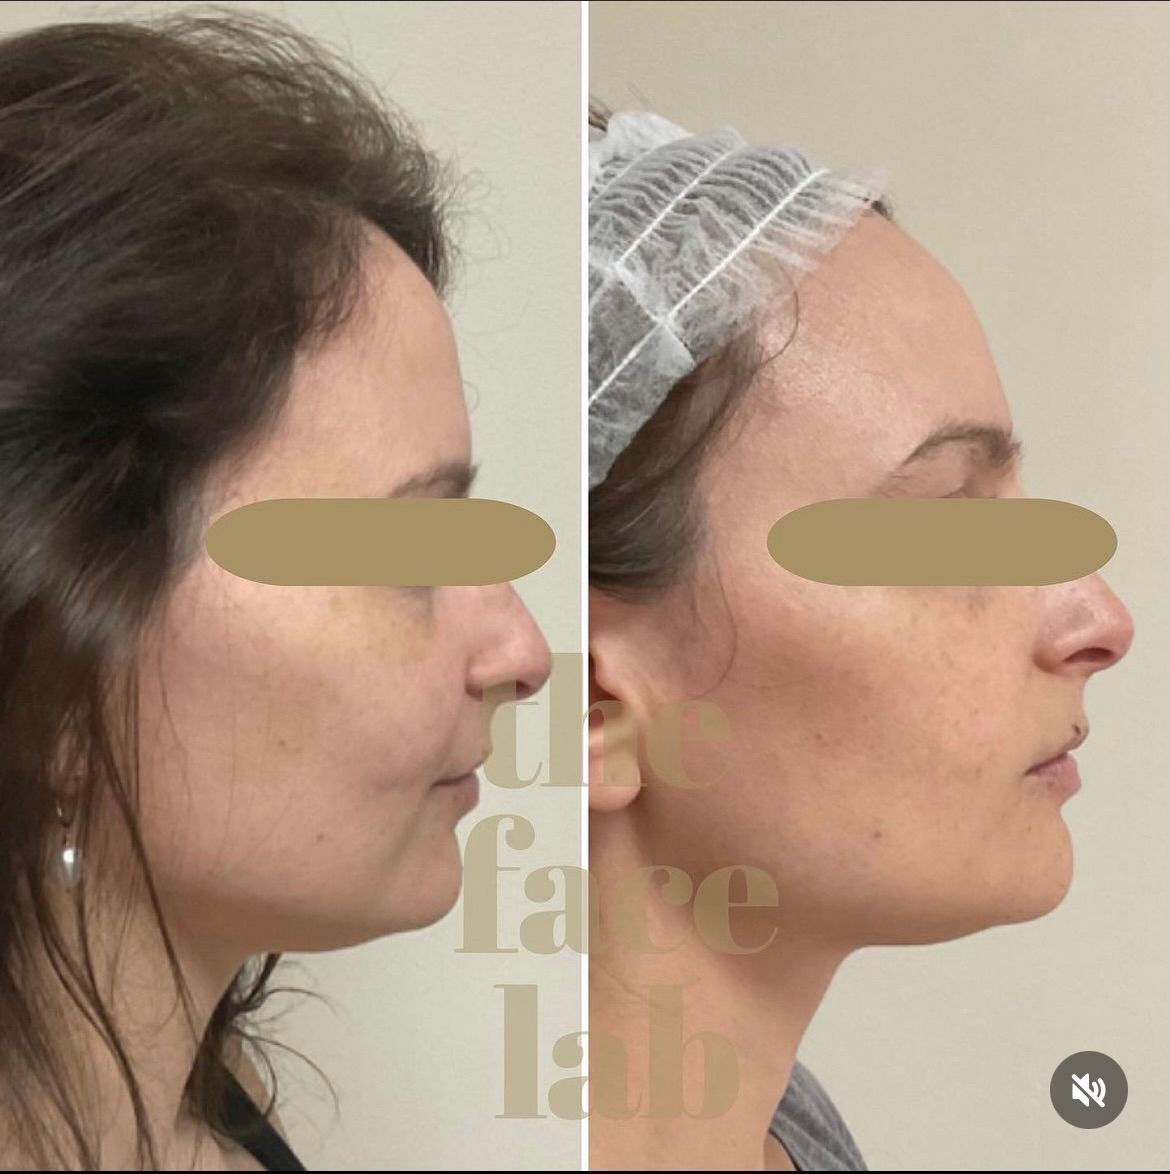 a before and after photo of a woman 's face with the words the faire lab behind her